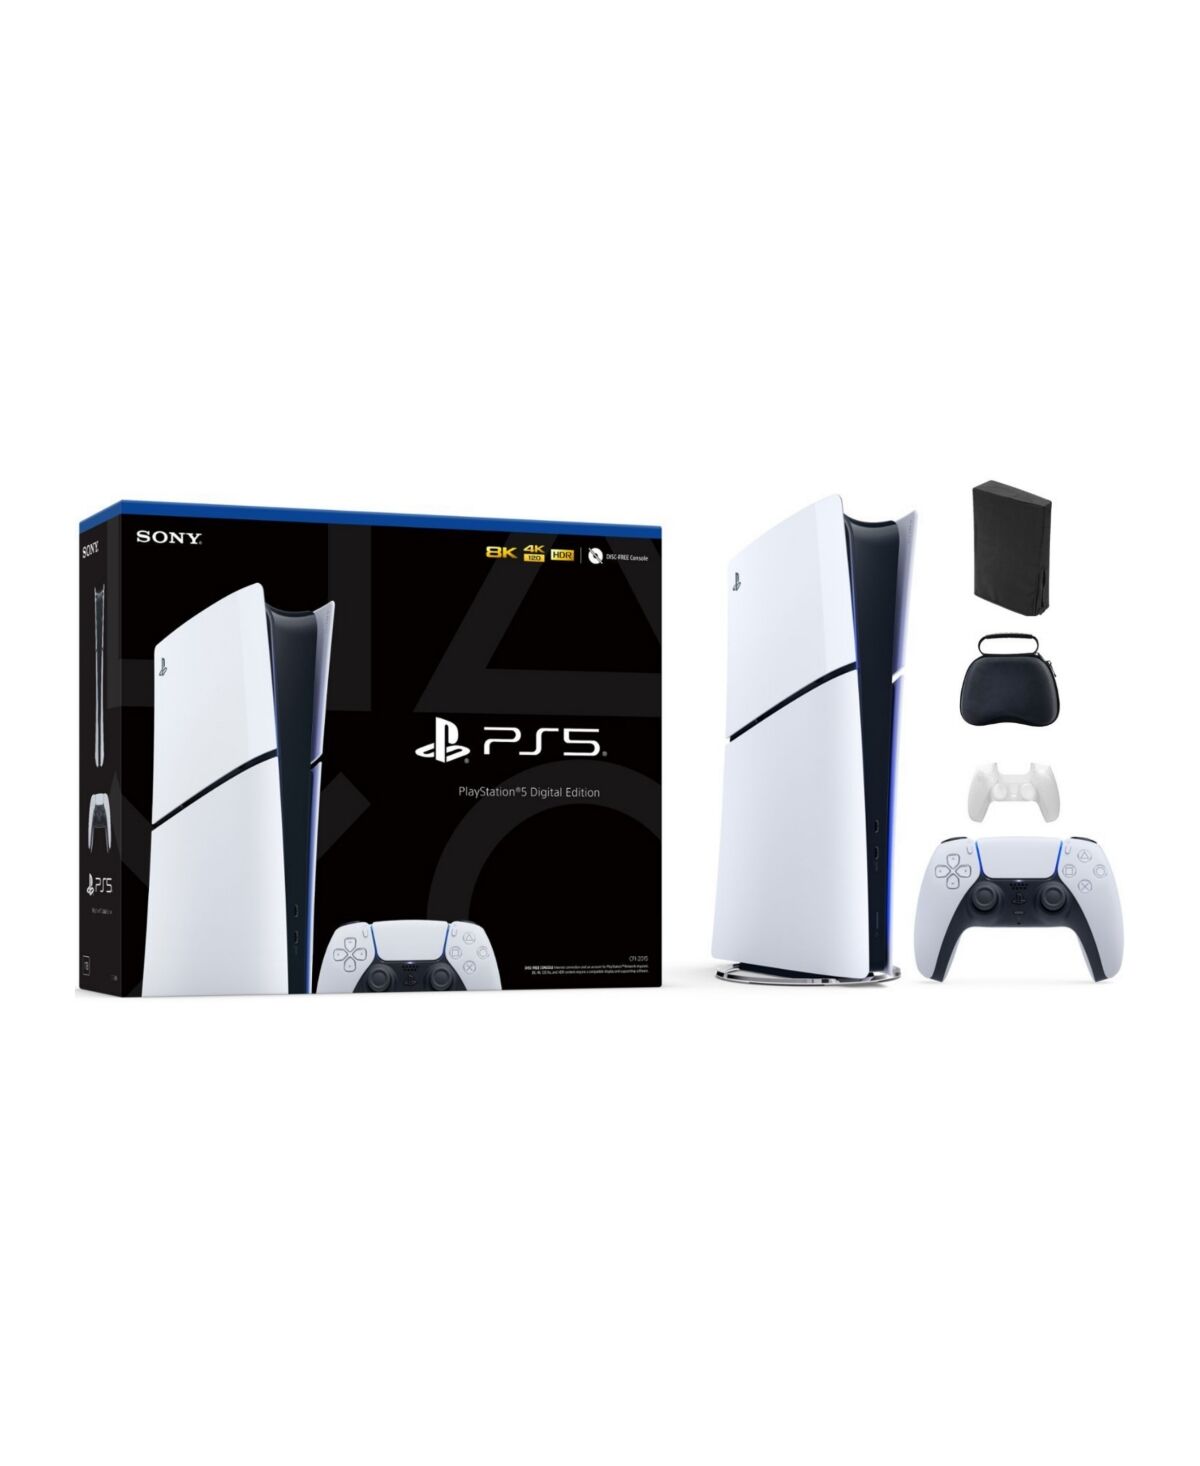 Sony - PlayStation 5 Slim Console Digital Edition - White Bundle With Accessories - White